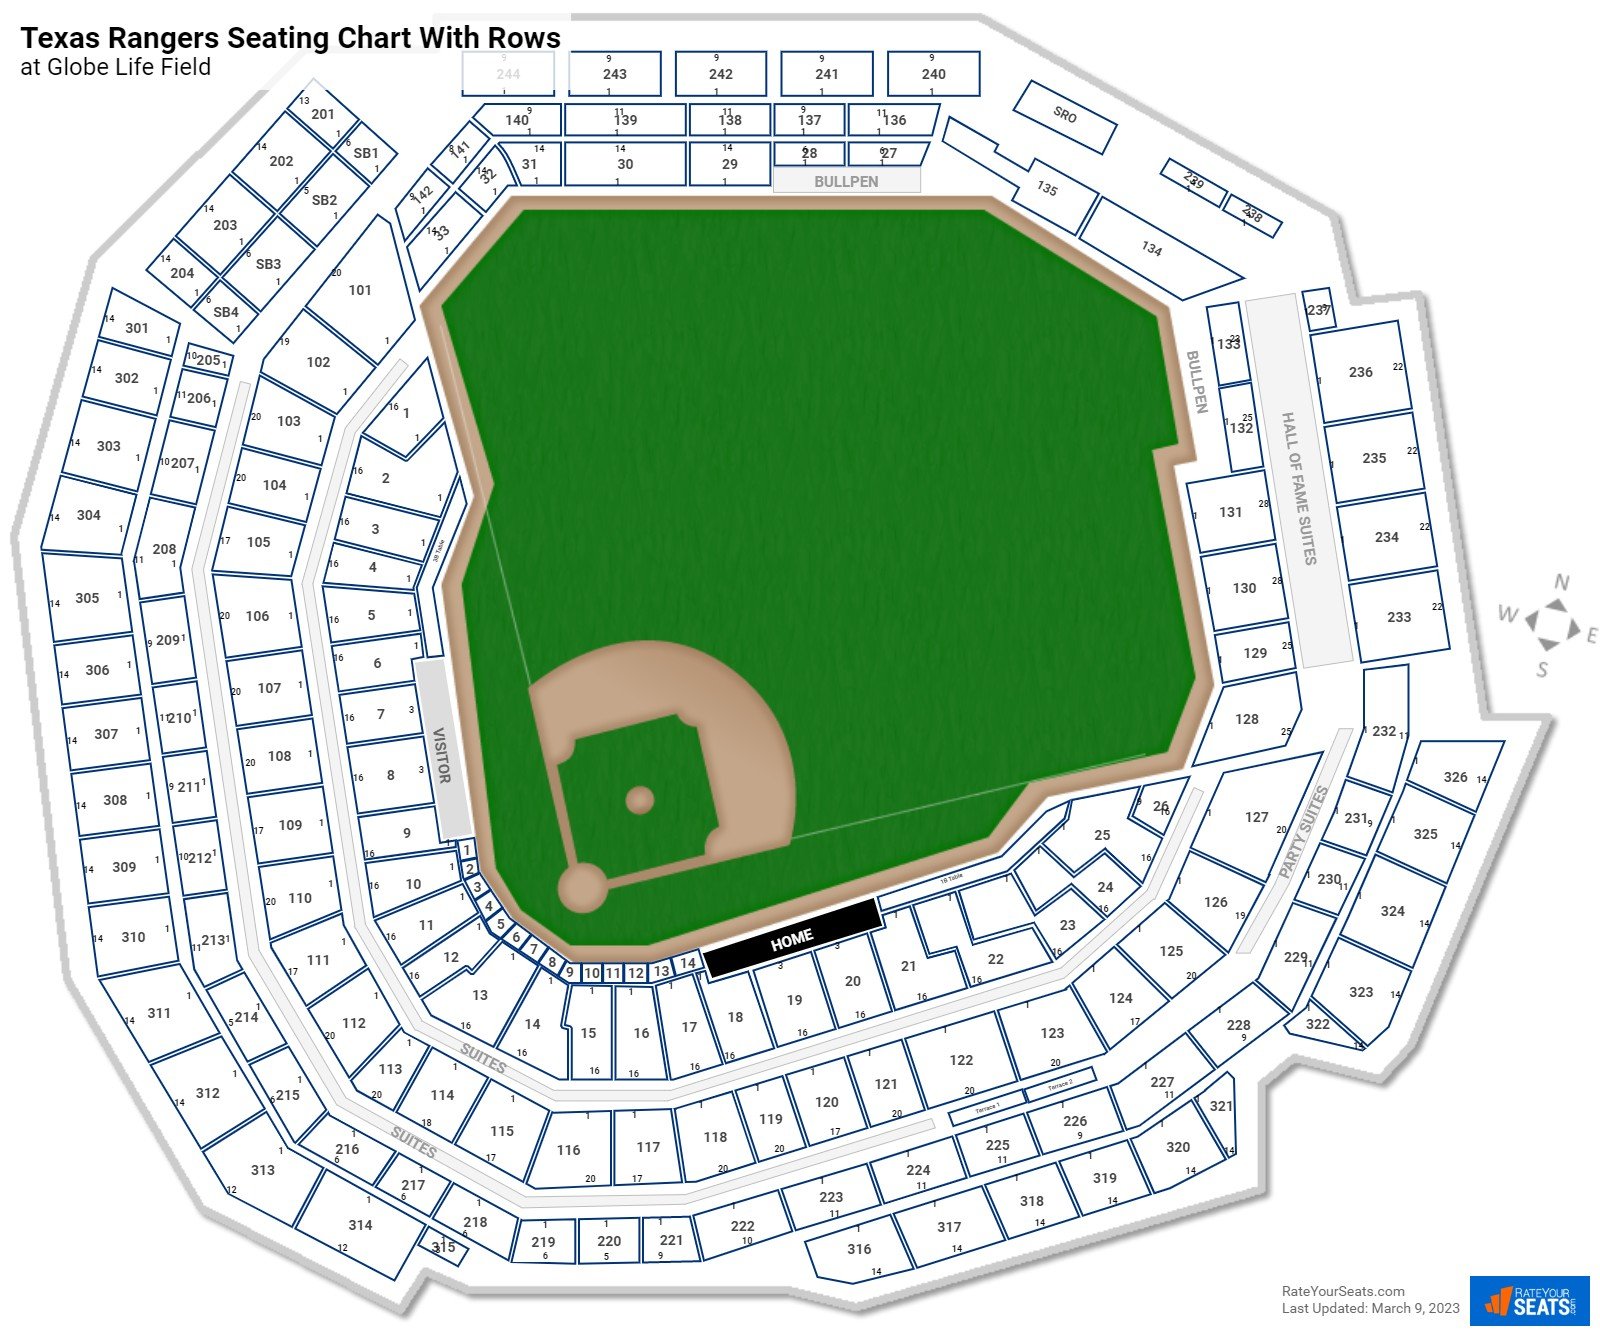 Texas Rangers Seating Chart With Rows At Globe Life Field 